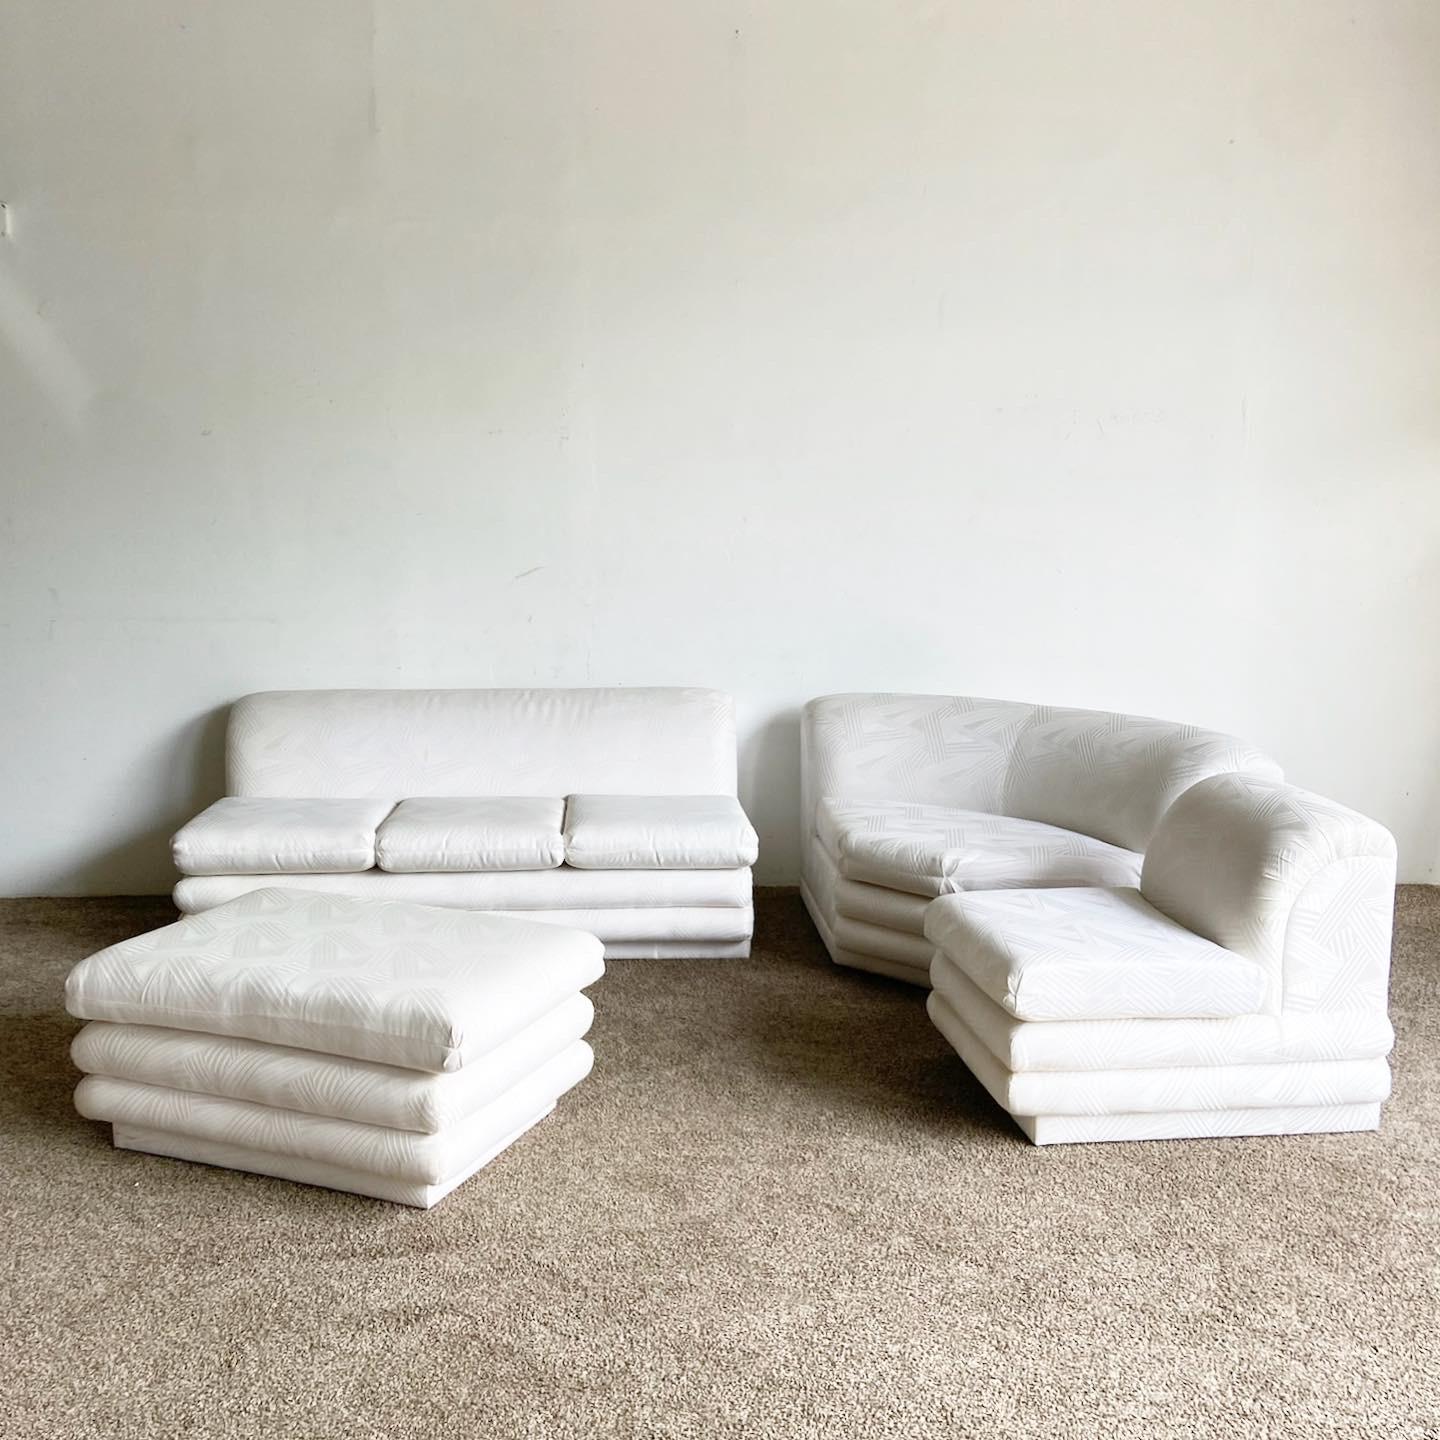 Exceptional 4 piece vintage postmodern sectional sofa. Features a white fabric throughout the sofa. ??

Foot rest measures 41”W, 29”D, 18.5”H
?Long section measures 70”W, 37.5”D?
Curved section measures 68”W, 42.5”D?
Small section measures 24”W.